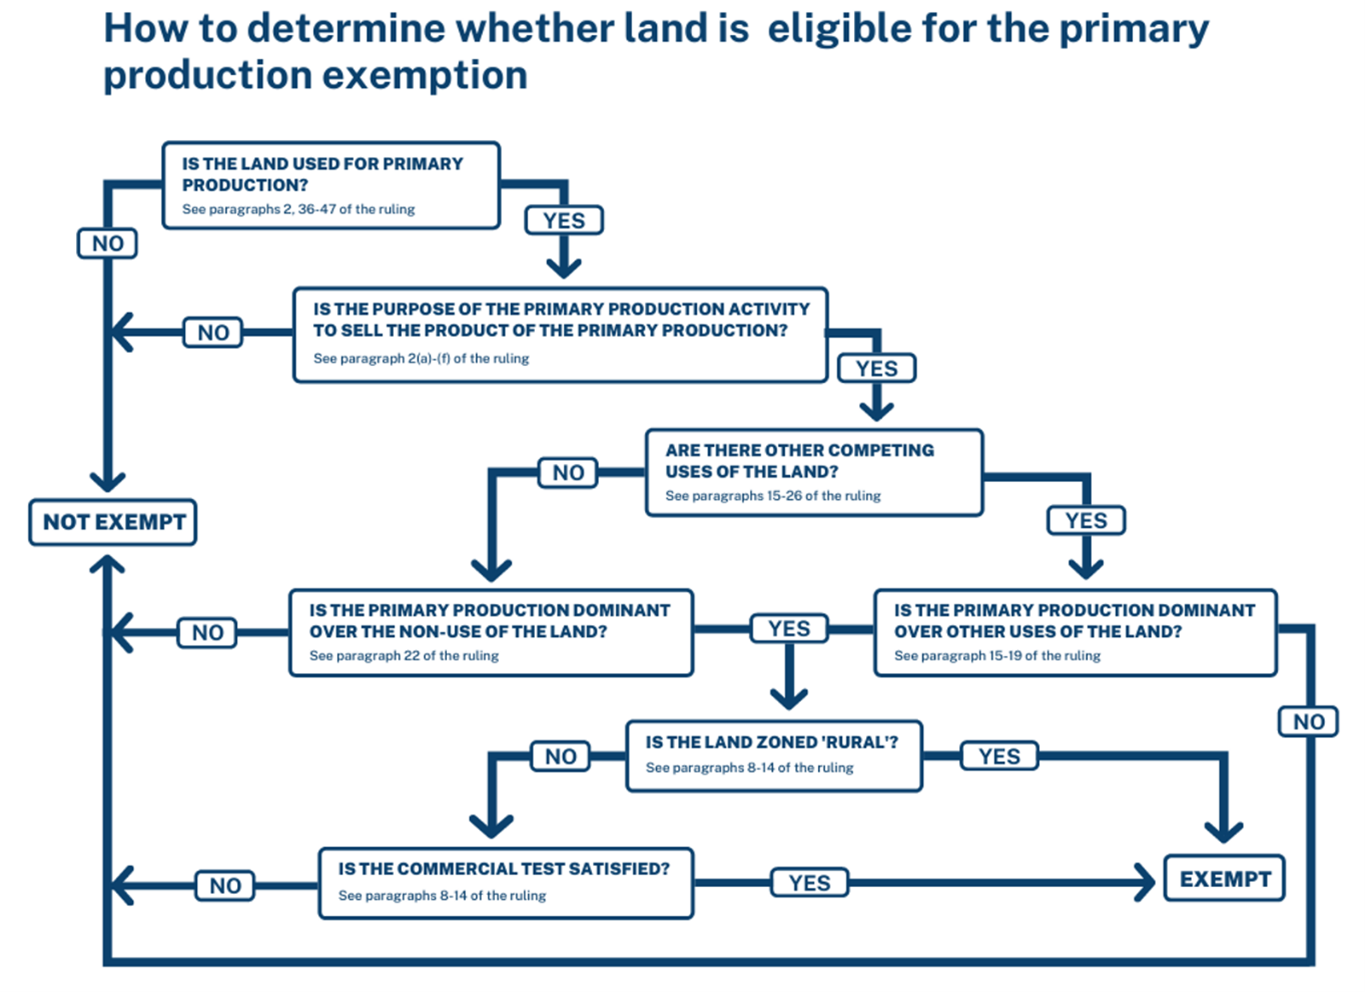 Flow chart demonstrating how to determine whether land is eligible for primary production and exemption